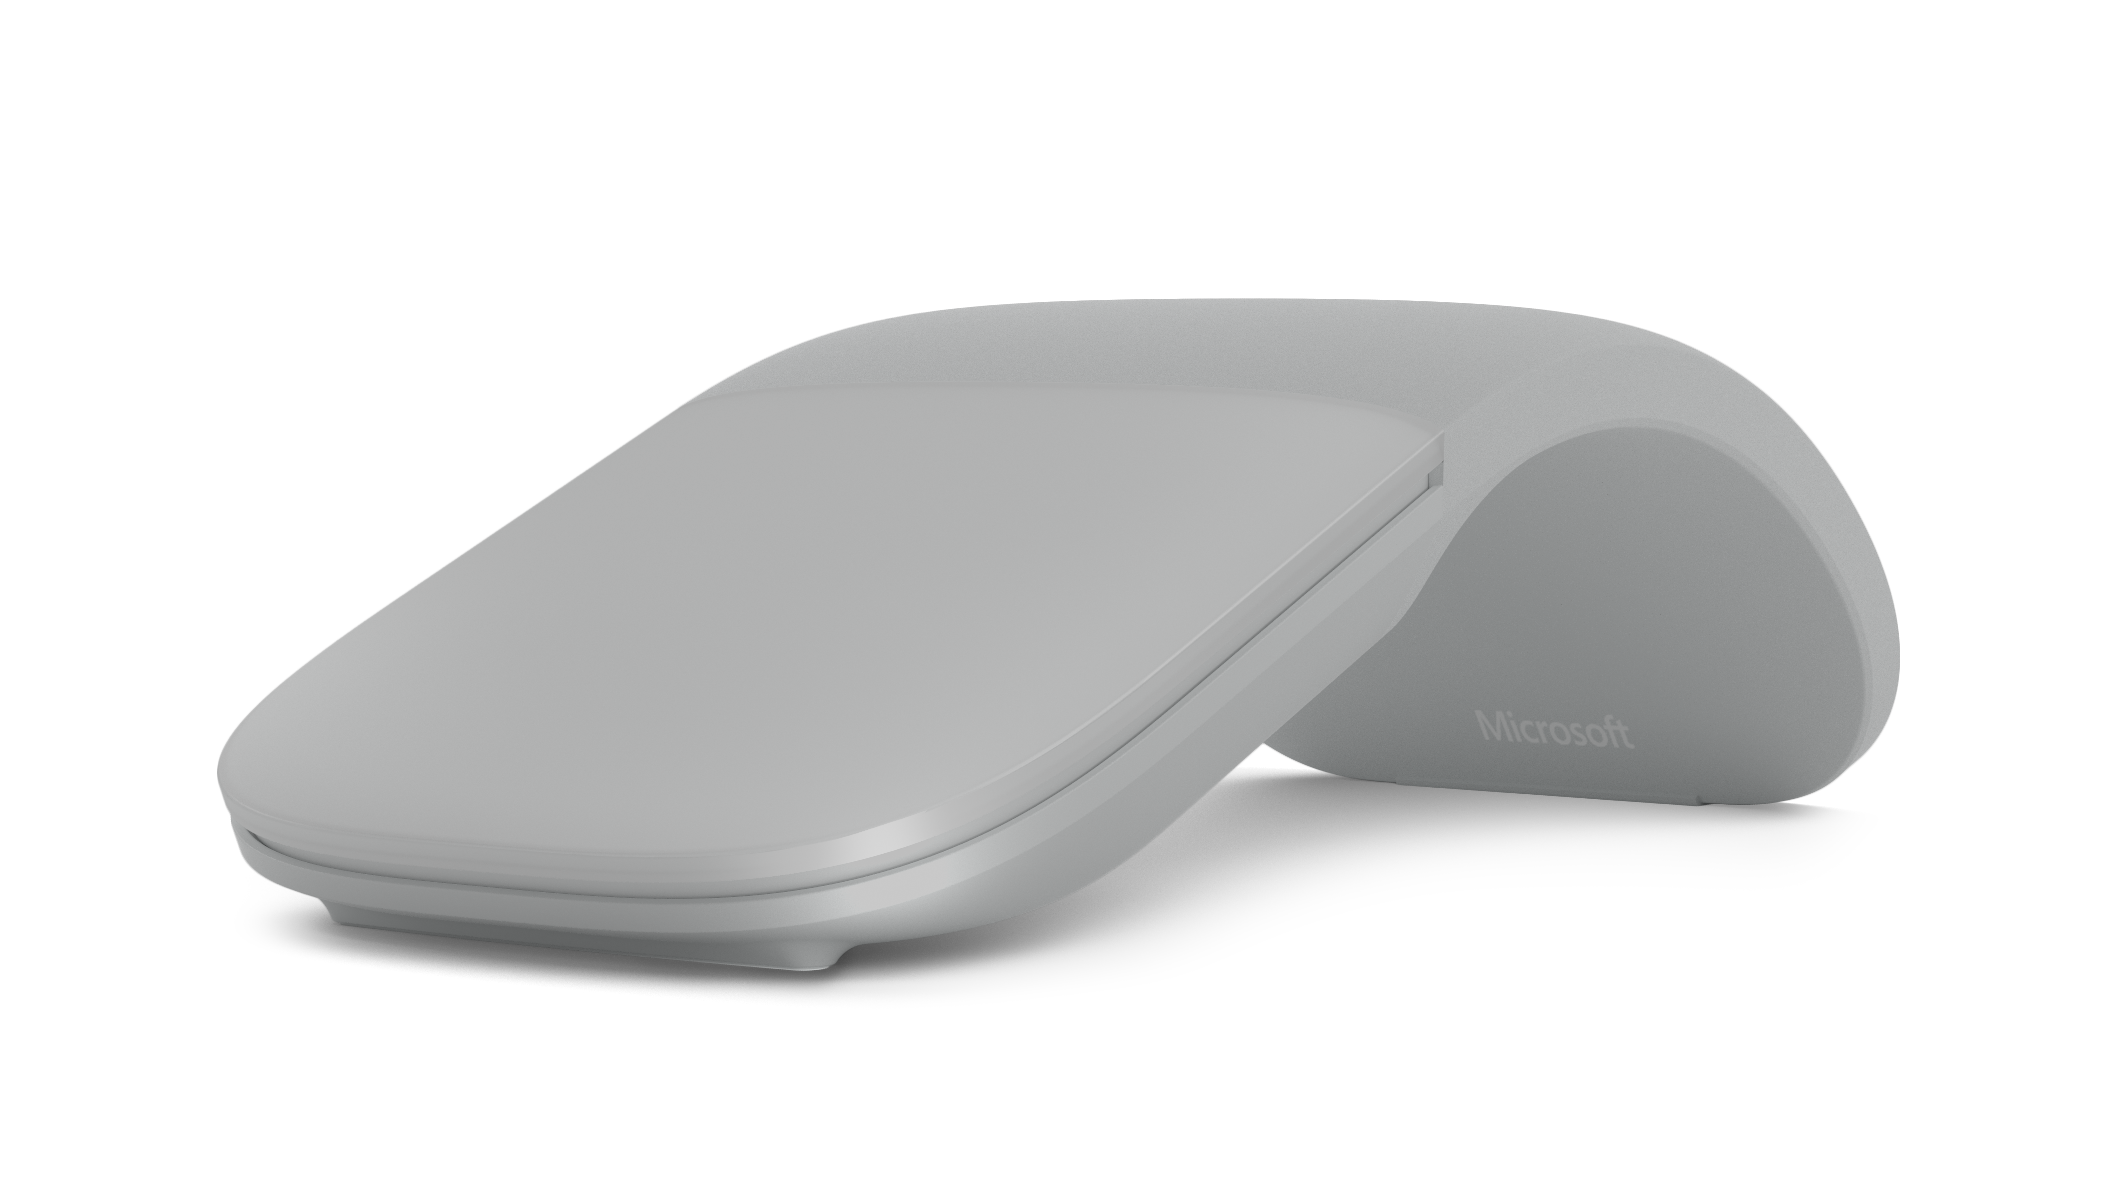 Surface Arc Mouse (Light Gray)